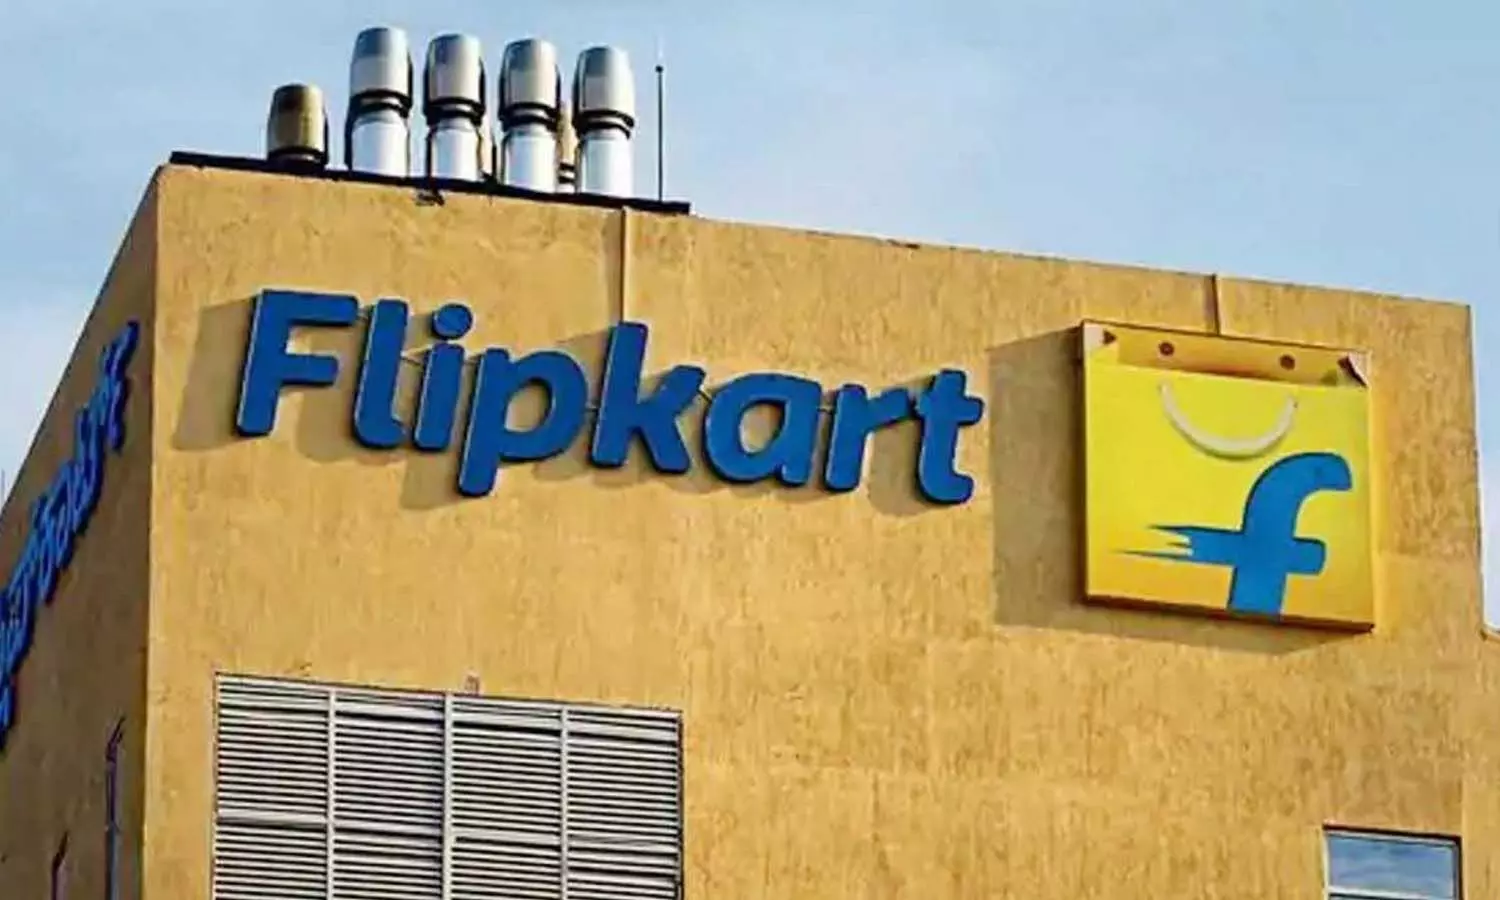 E-commerce company Flipkart has resolved to meet 100 percent of its electricity needs from renewable sources by 2030